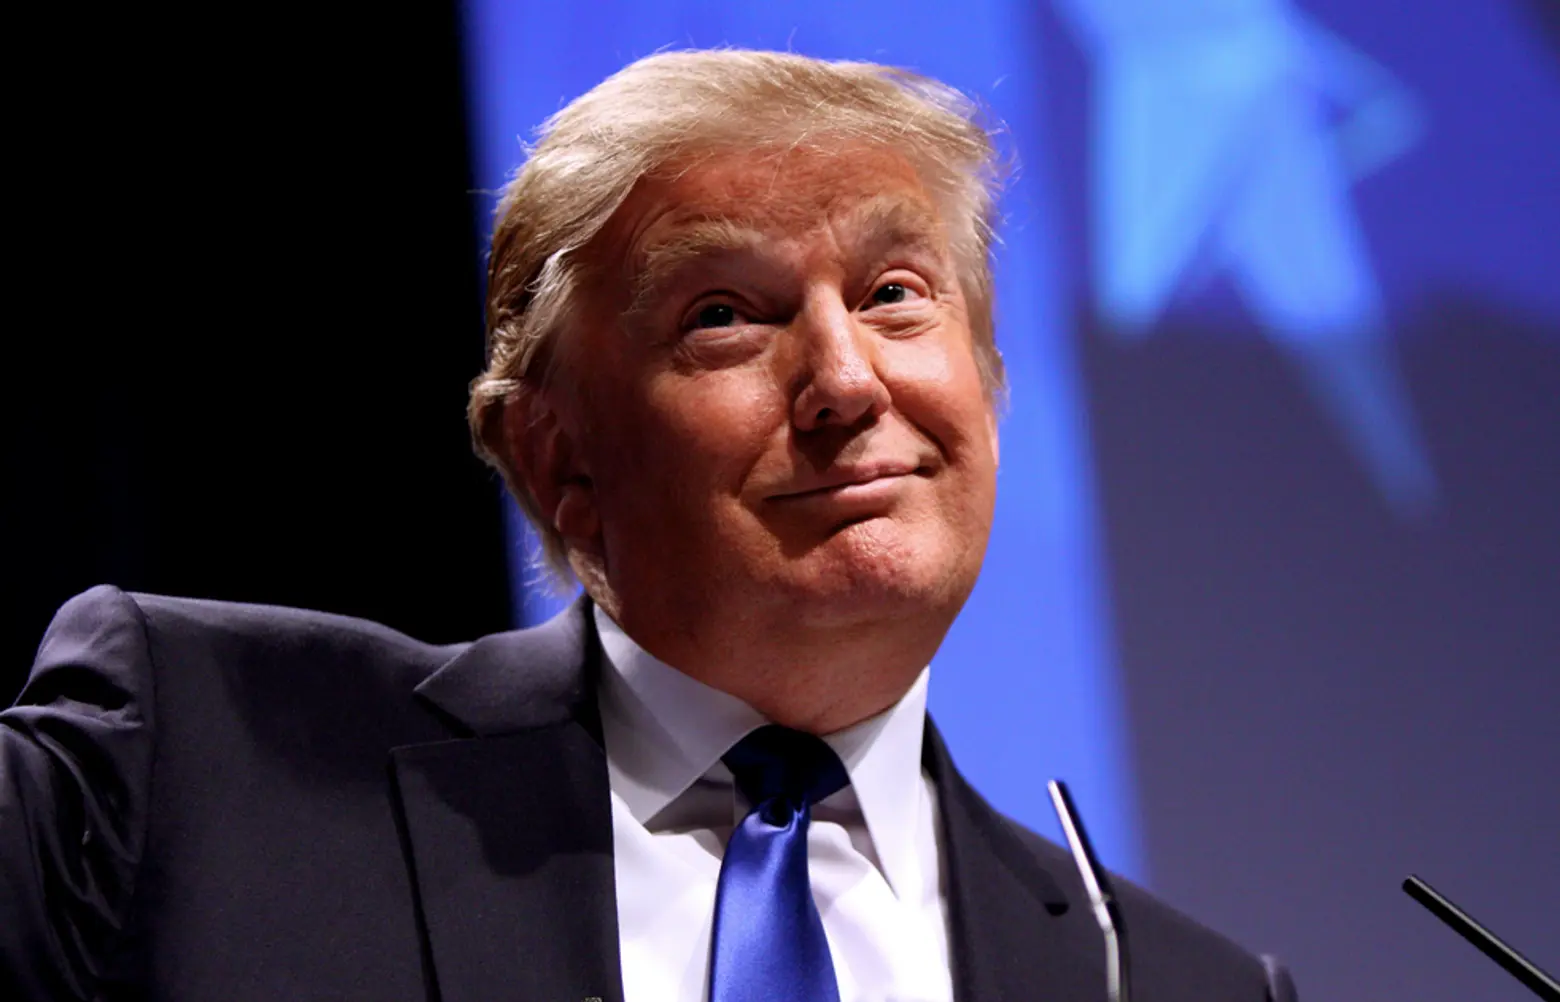 Real estate industry likely to benefit from a Trump presidency